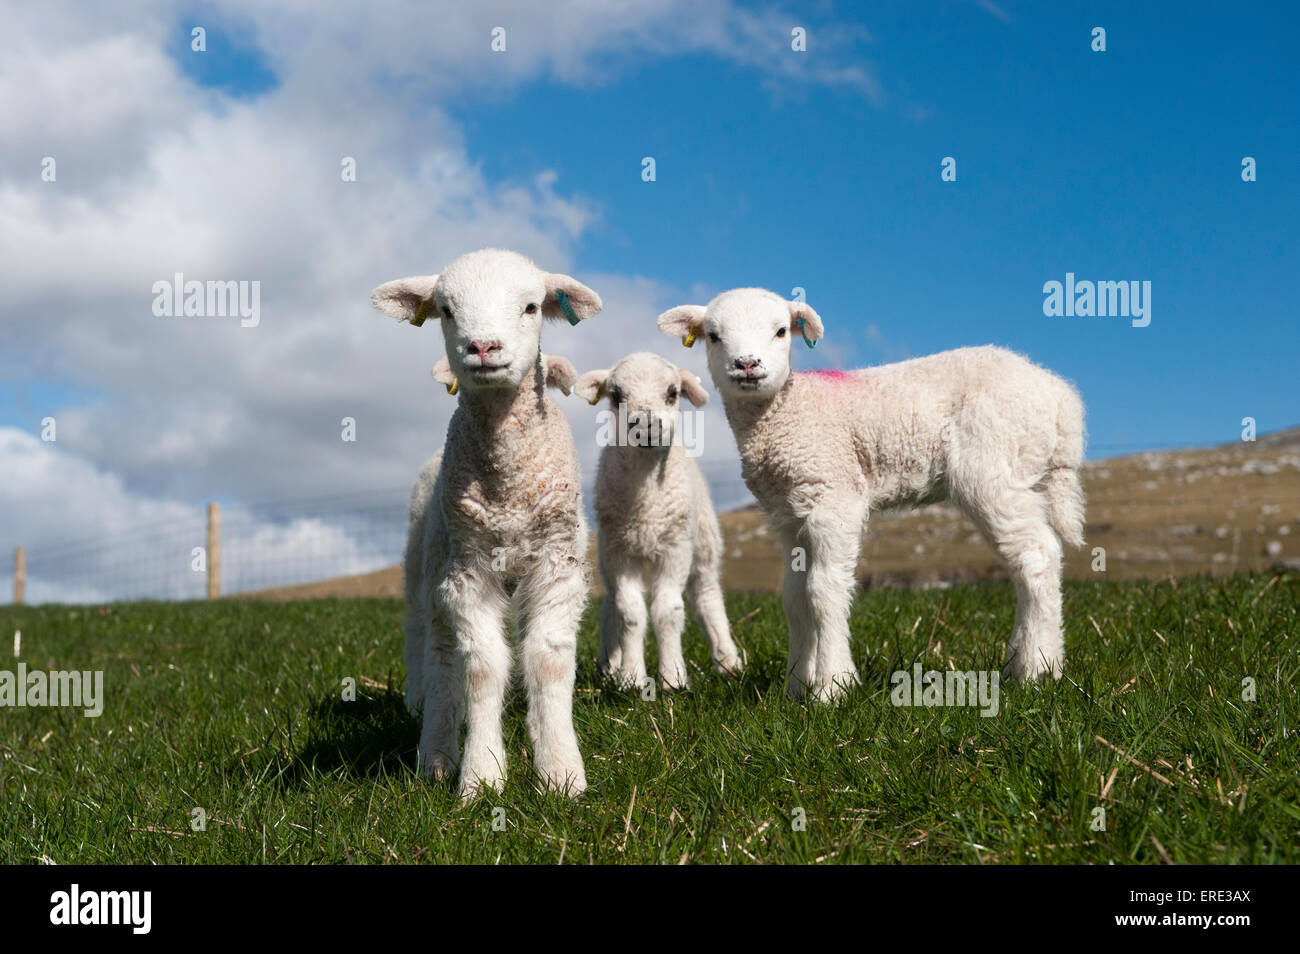 Lambs in spring playing in meadow on a bright sunny day. Cumbria, UK. Stock Photo